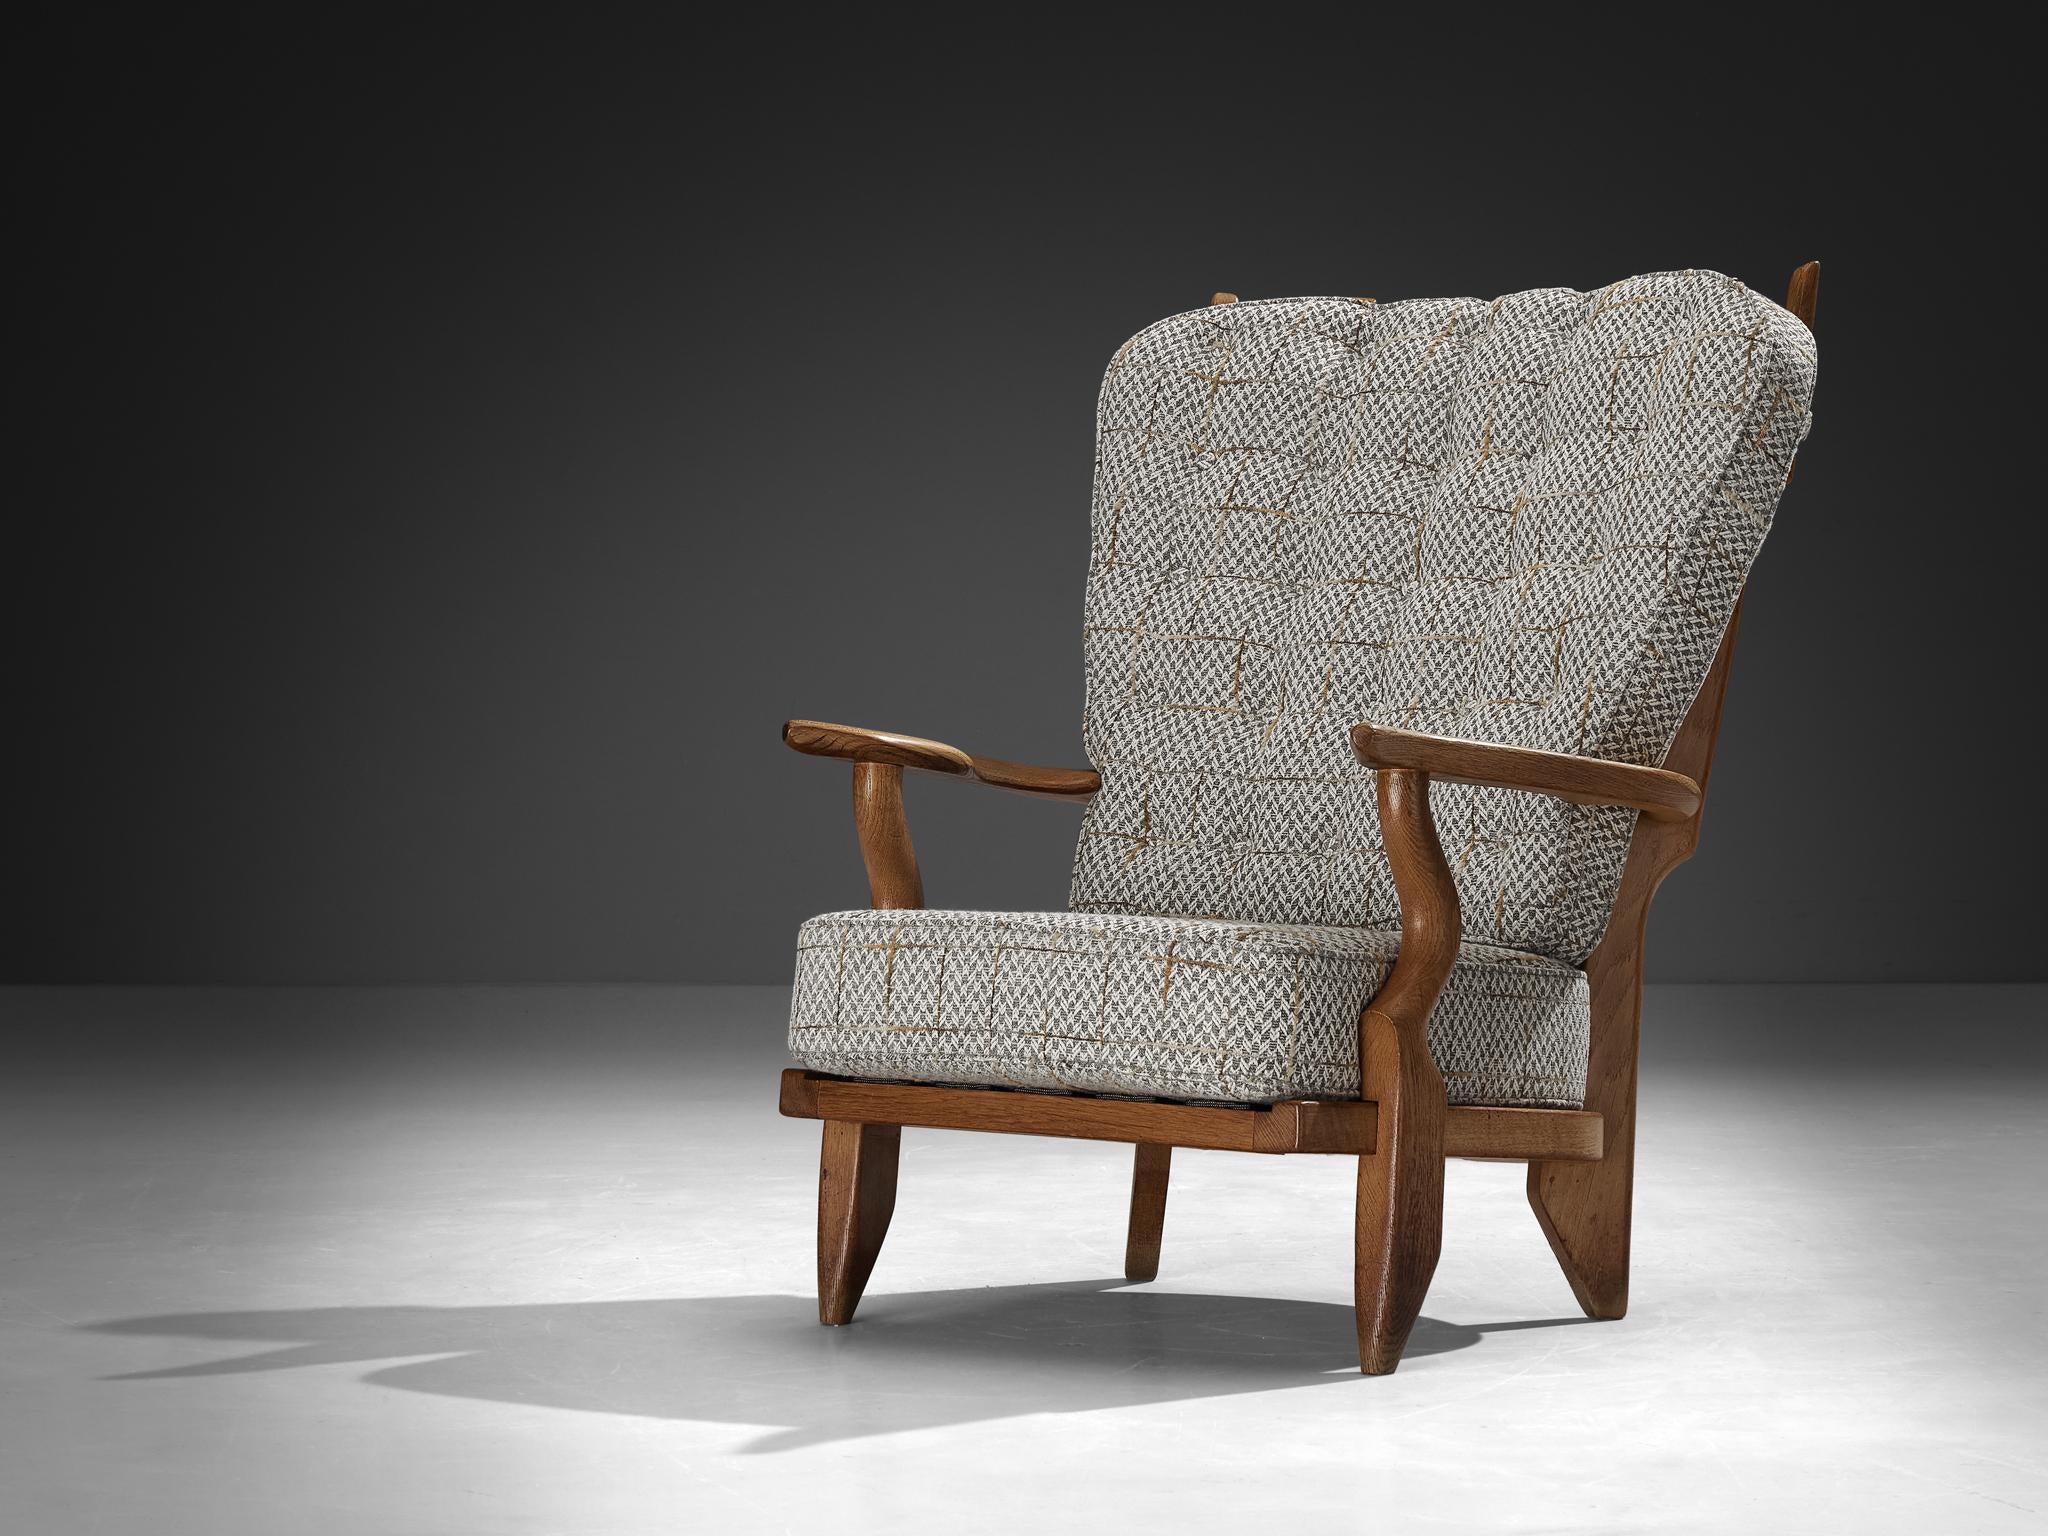 Guillerme & Chambron 'Grand Repos' Lounge Chair in Patterned Upholstery